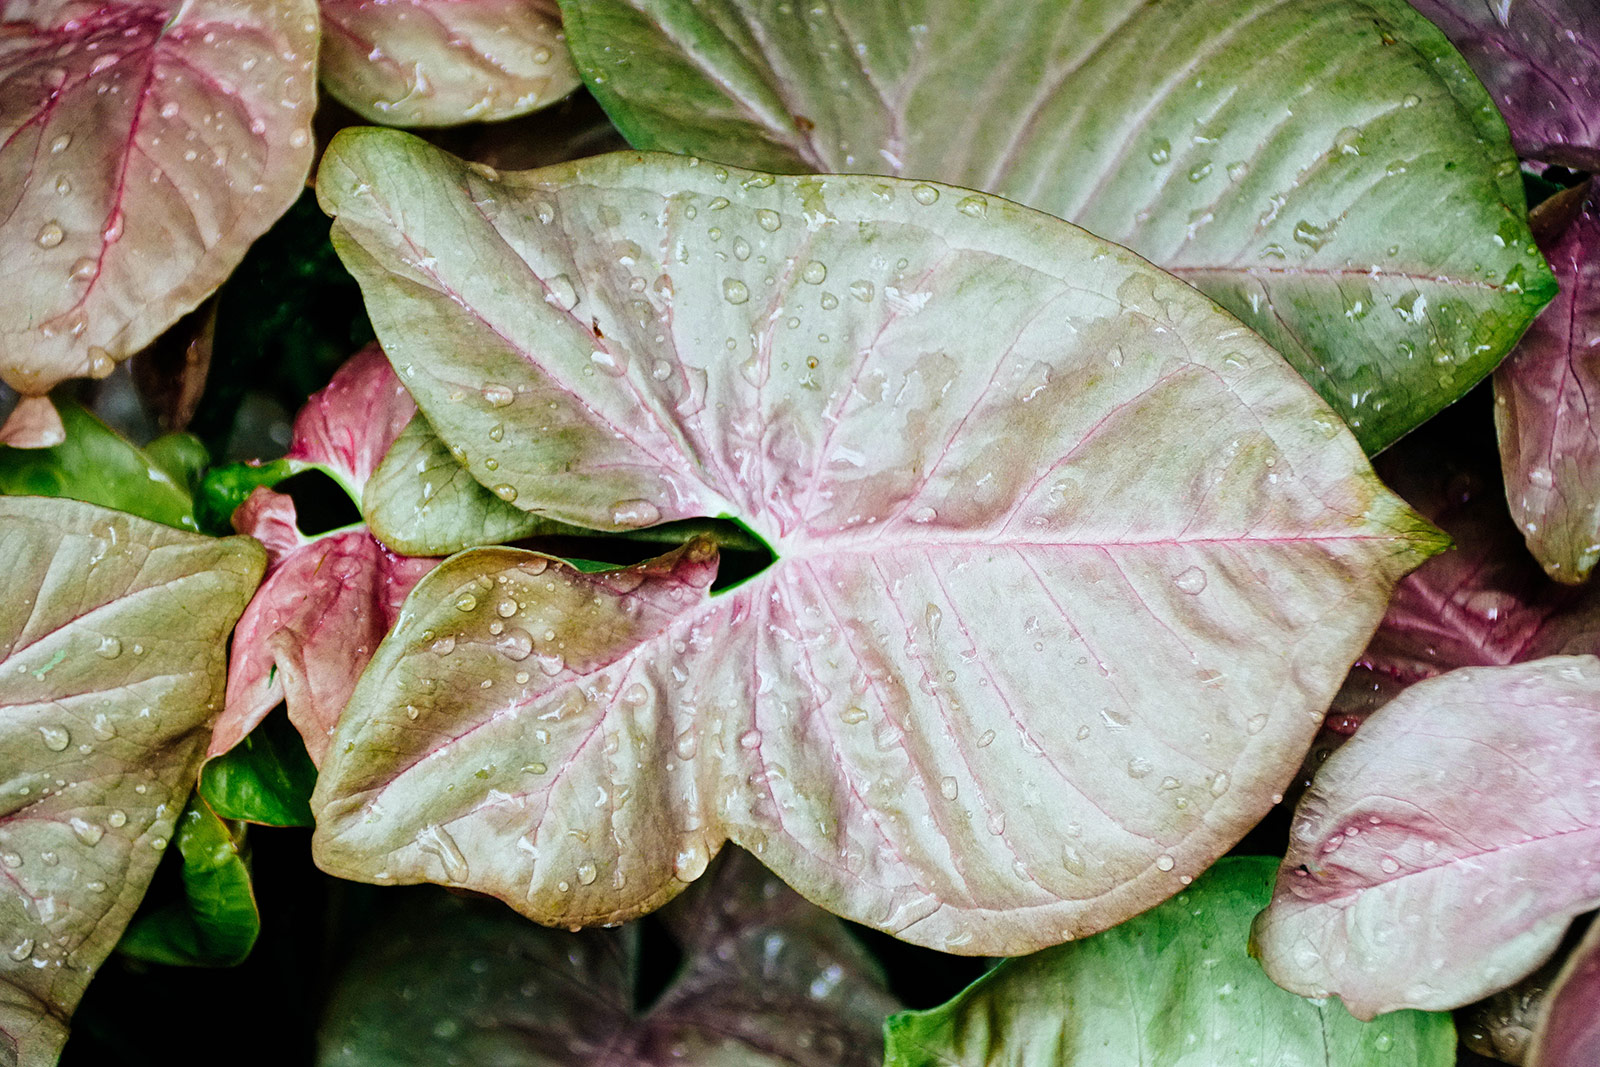 Close-up of Syngonium 'Neon Robusta' arrowhead plant leaf with water droplets on it